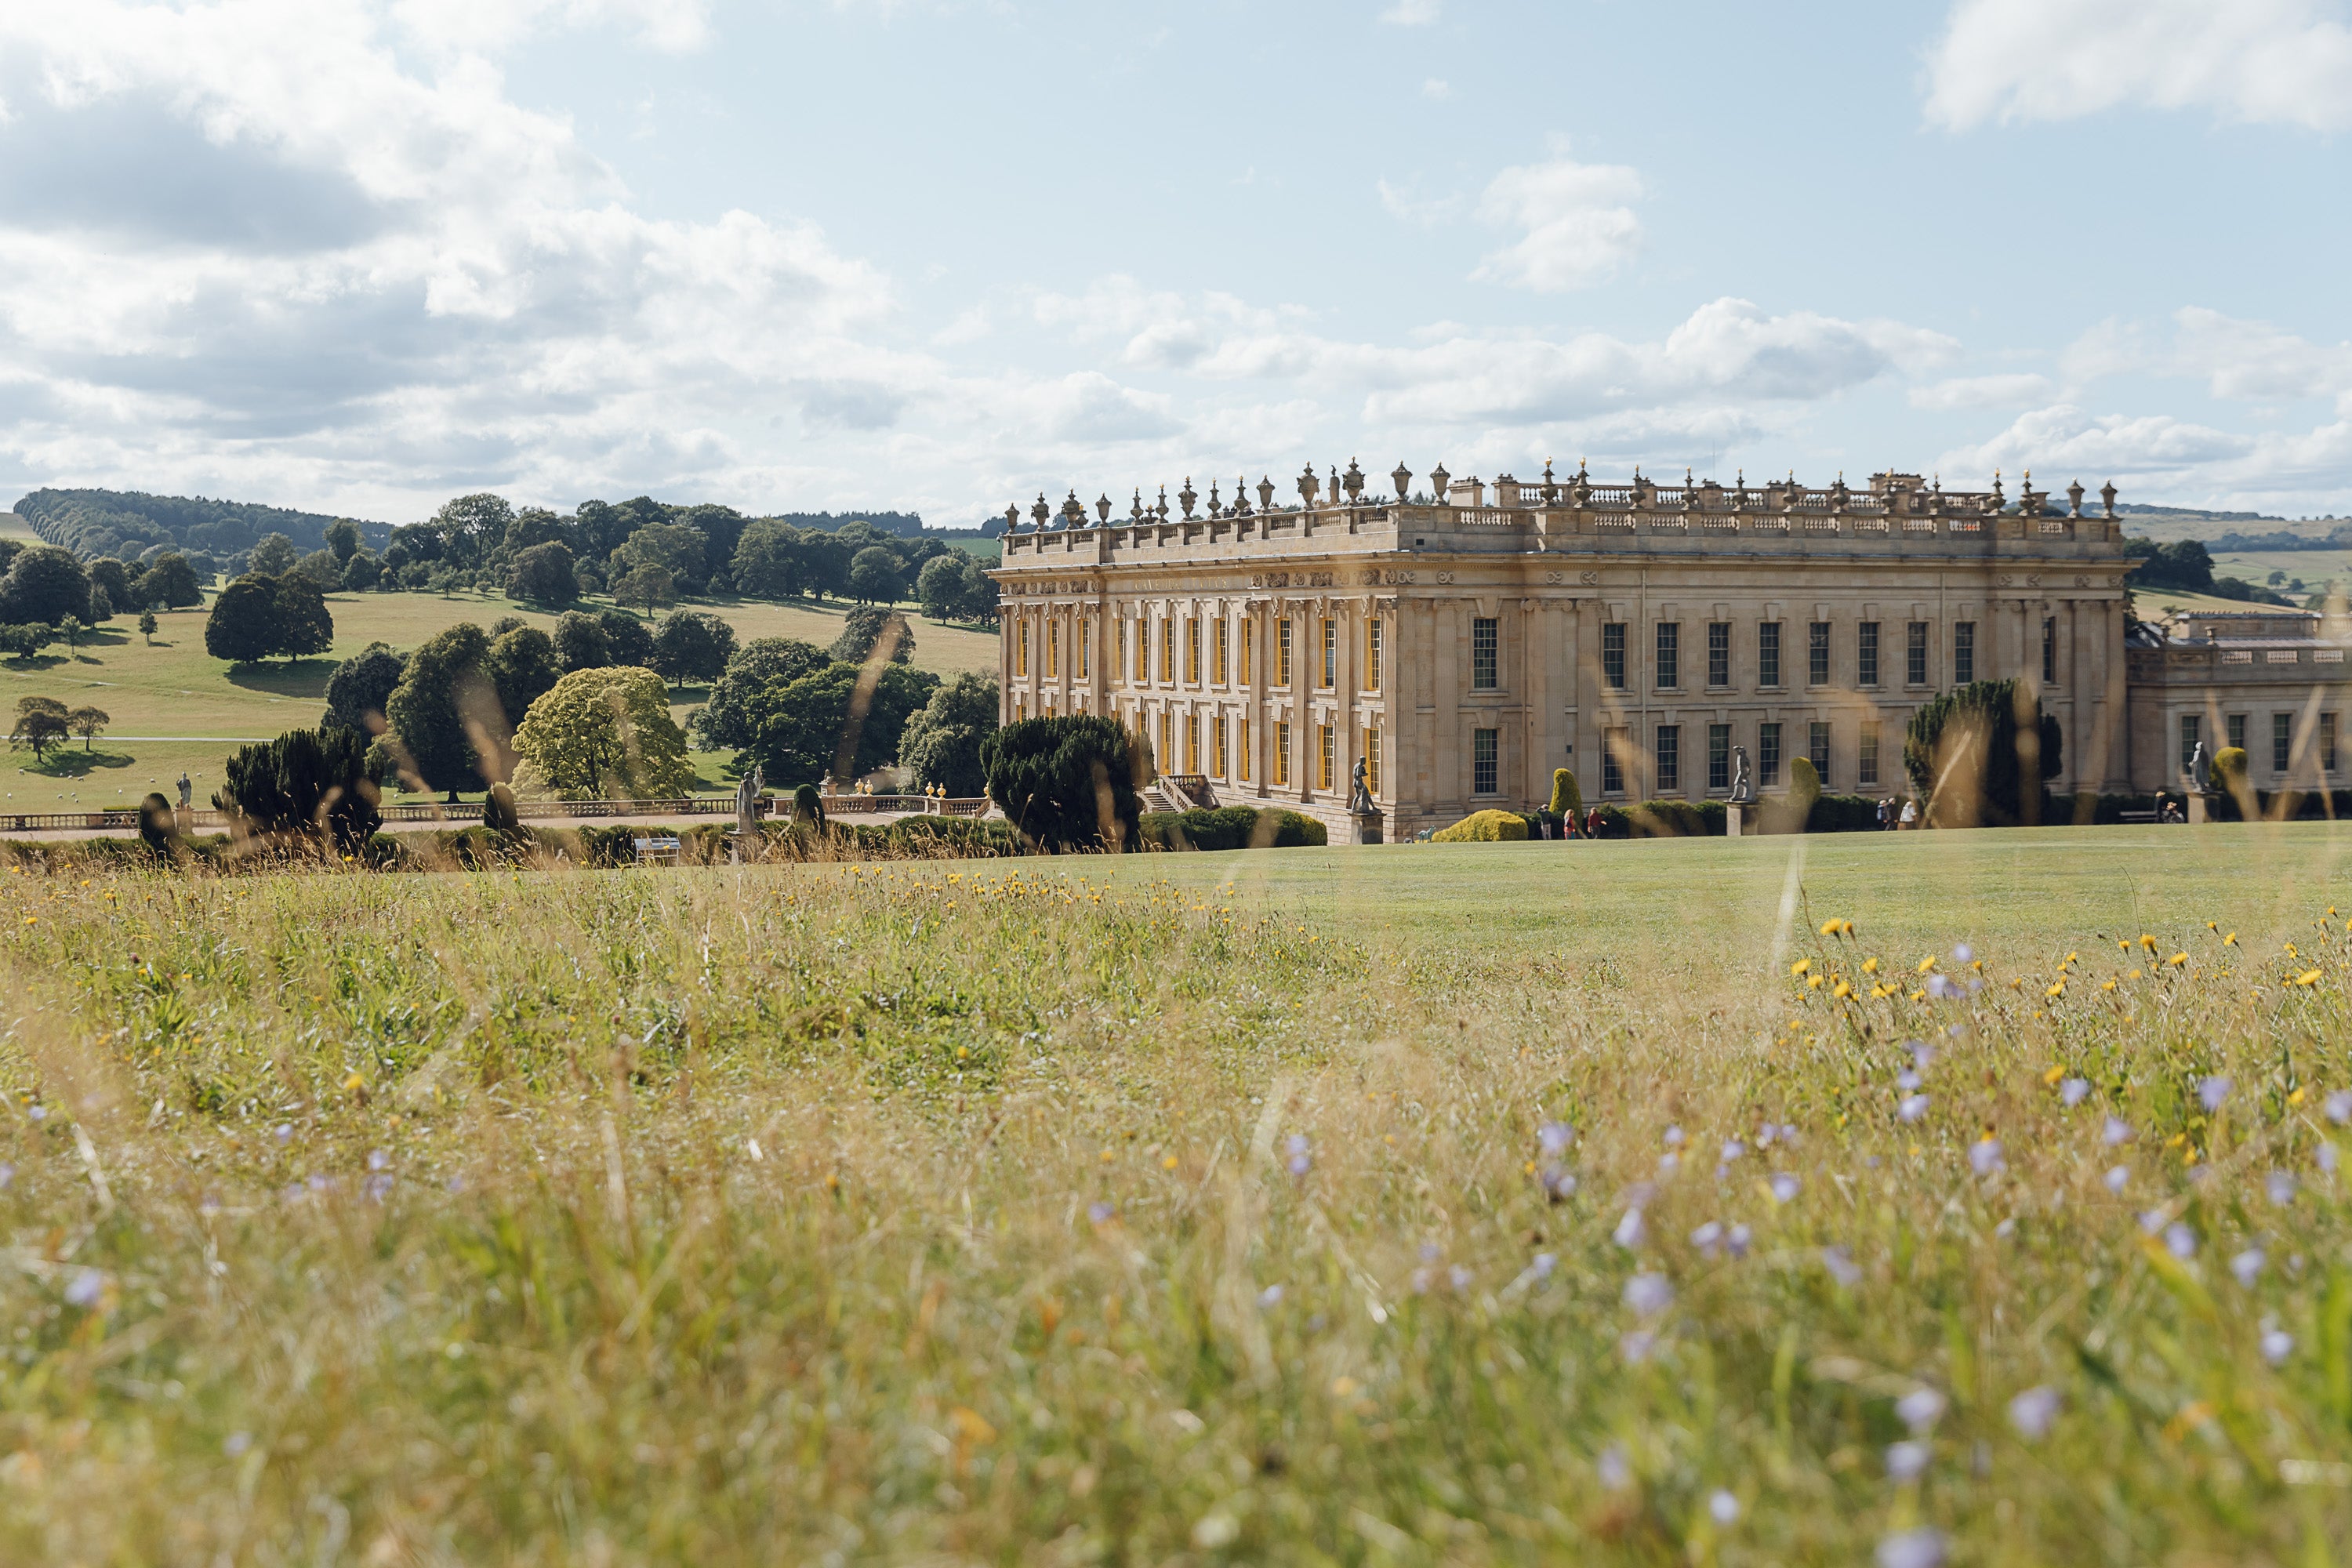 Is Mr Darcy in? Chatsworth House stands overlooking spectacular grounds